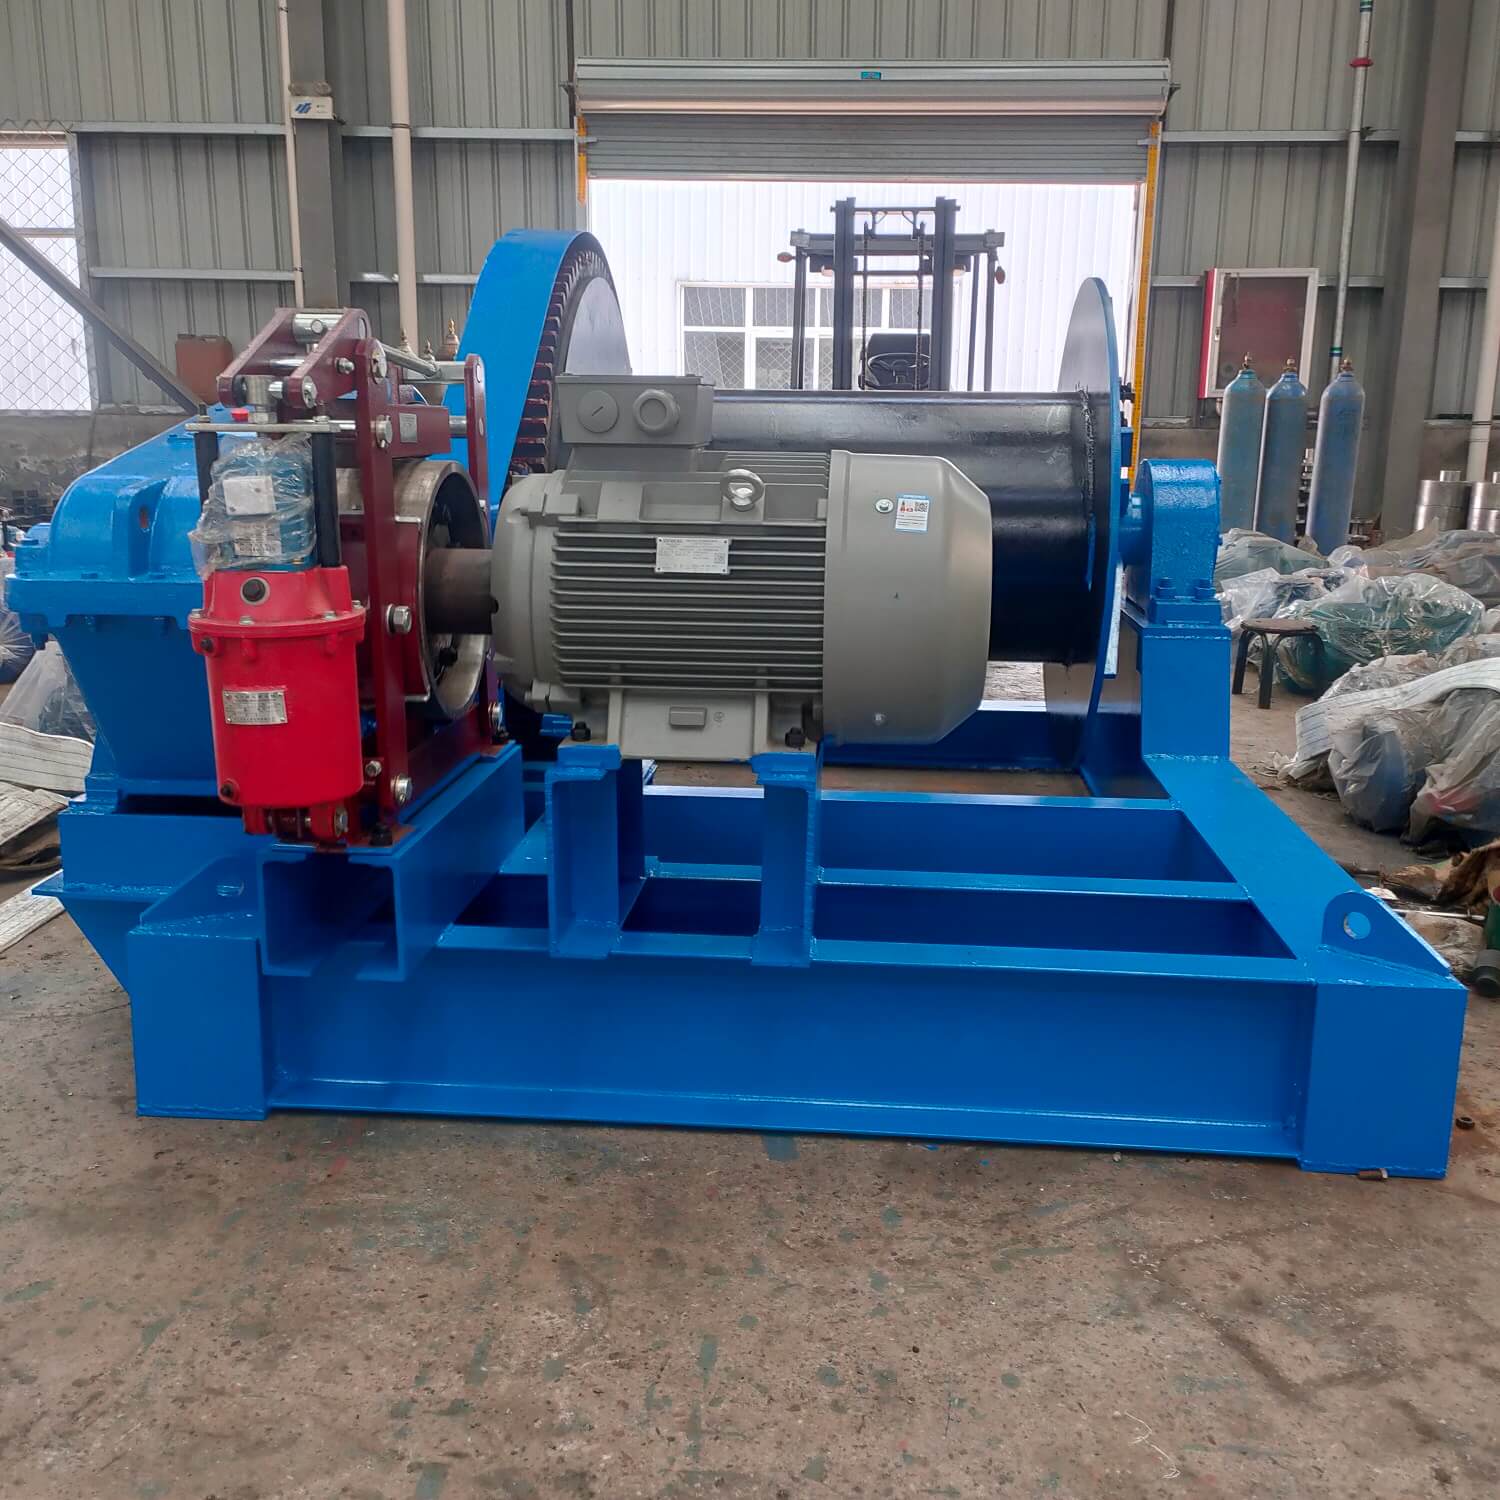 Site photos of 16 ton Building Electric Winch (Pulling cable winch)-5.jpg